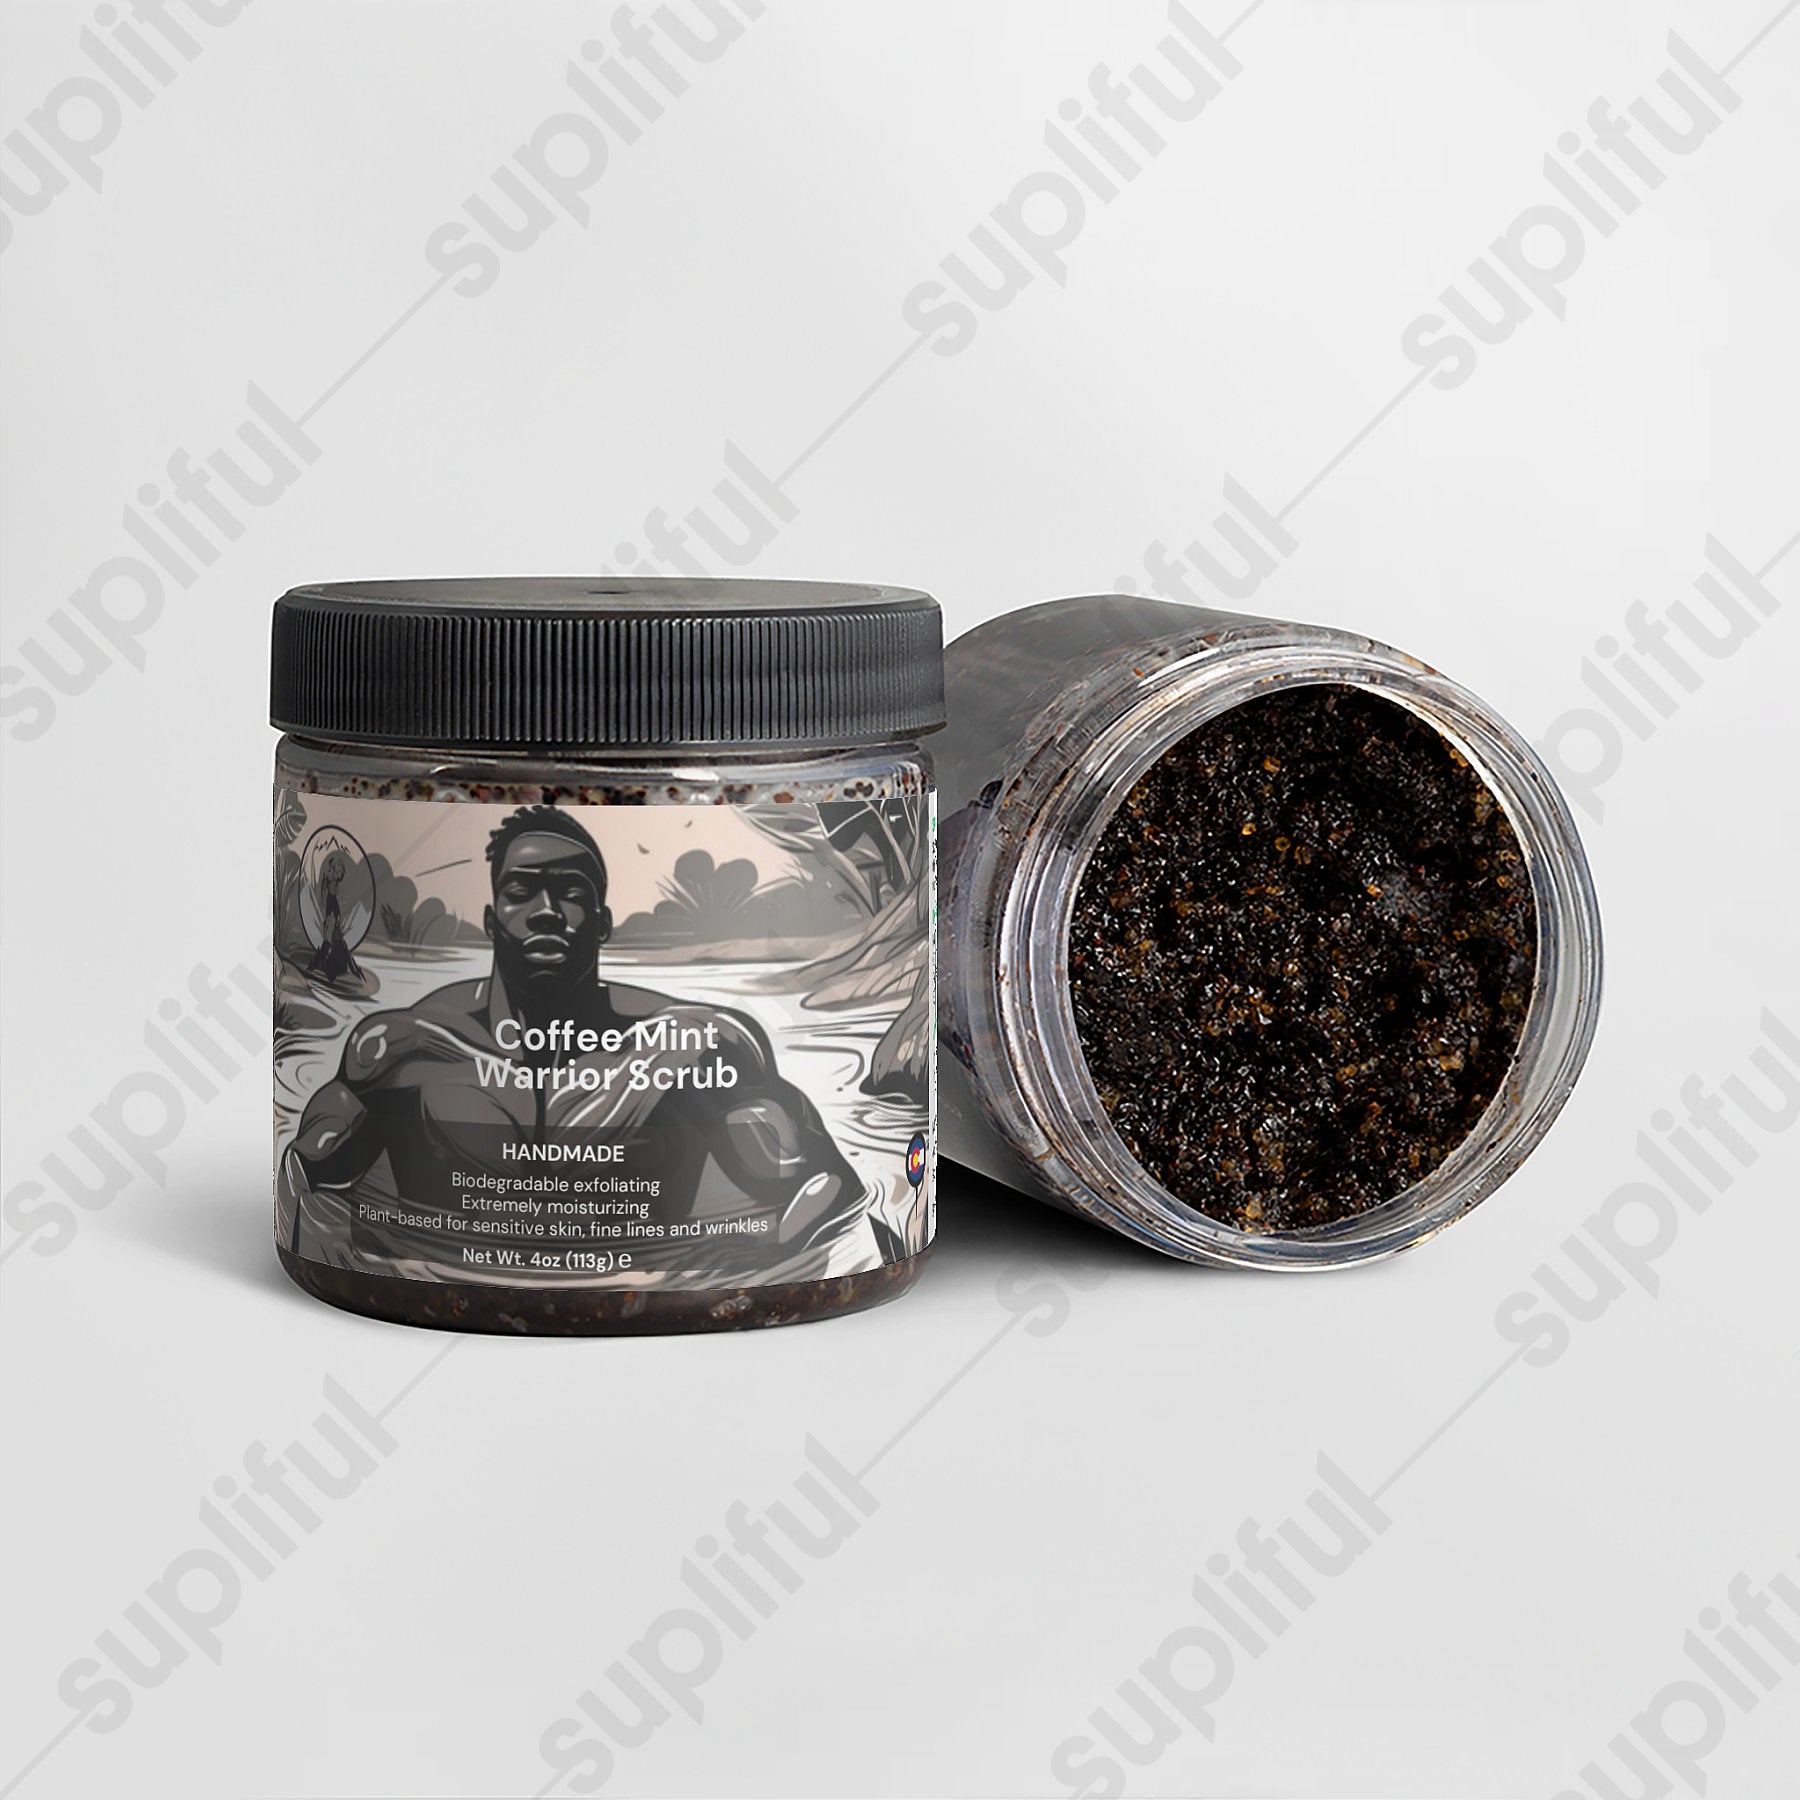 Coffee Mint Warrior ScrubPersonal Care and BeautyExperience the rejuvenating power of our Peppermint Coffee Scrub, designed to invigorate your skin and provide a multitude of benefits for a fresher, younger, and brCoffee Mint Warrior ScrubThe Rocky Ranger